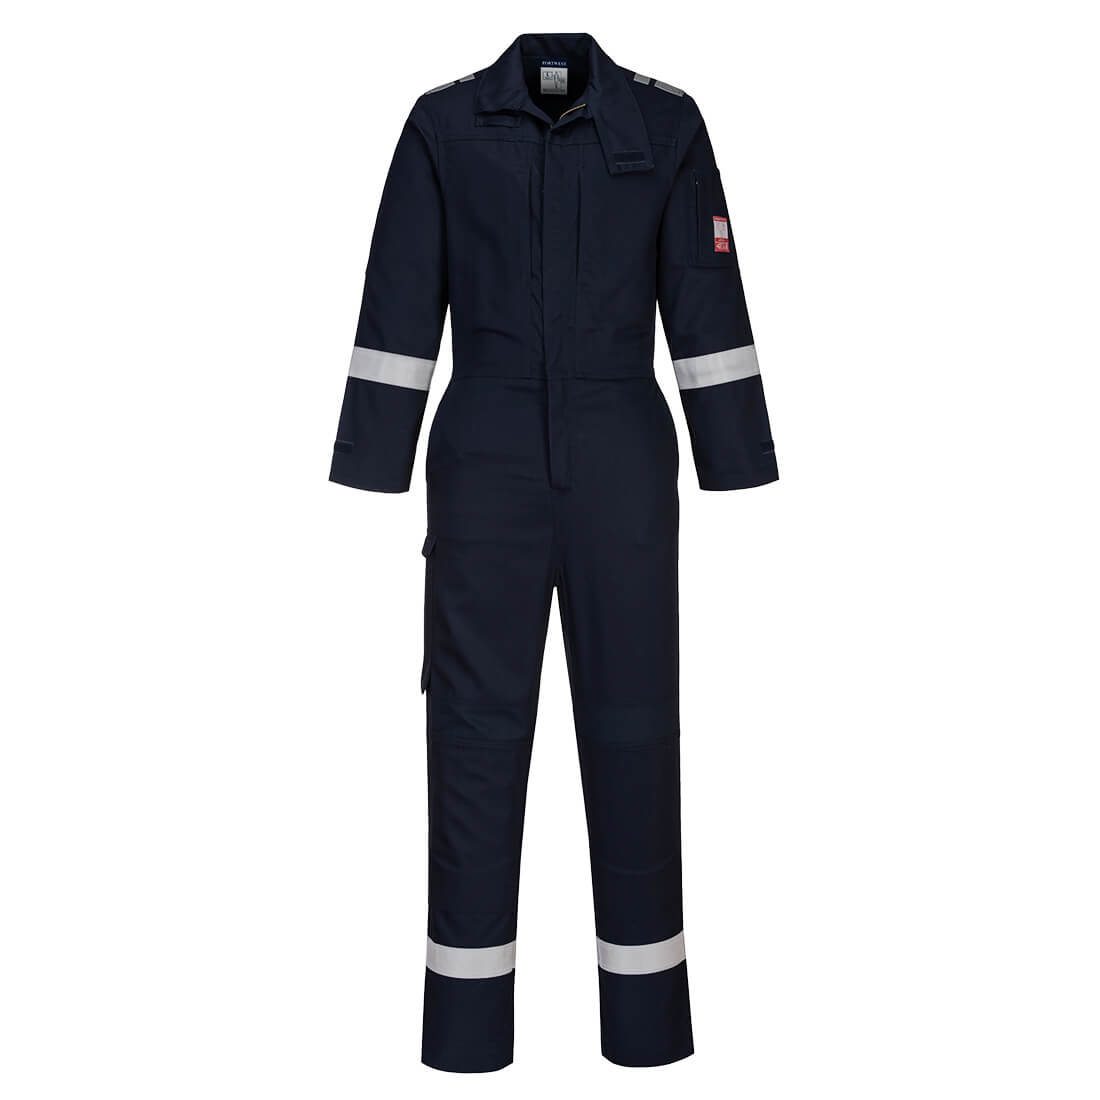 Bizflame Plus Lightweight Stretch Panelled Coverall - arbeitskleidung-gmbh